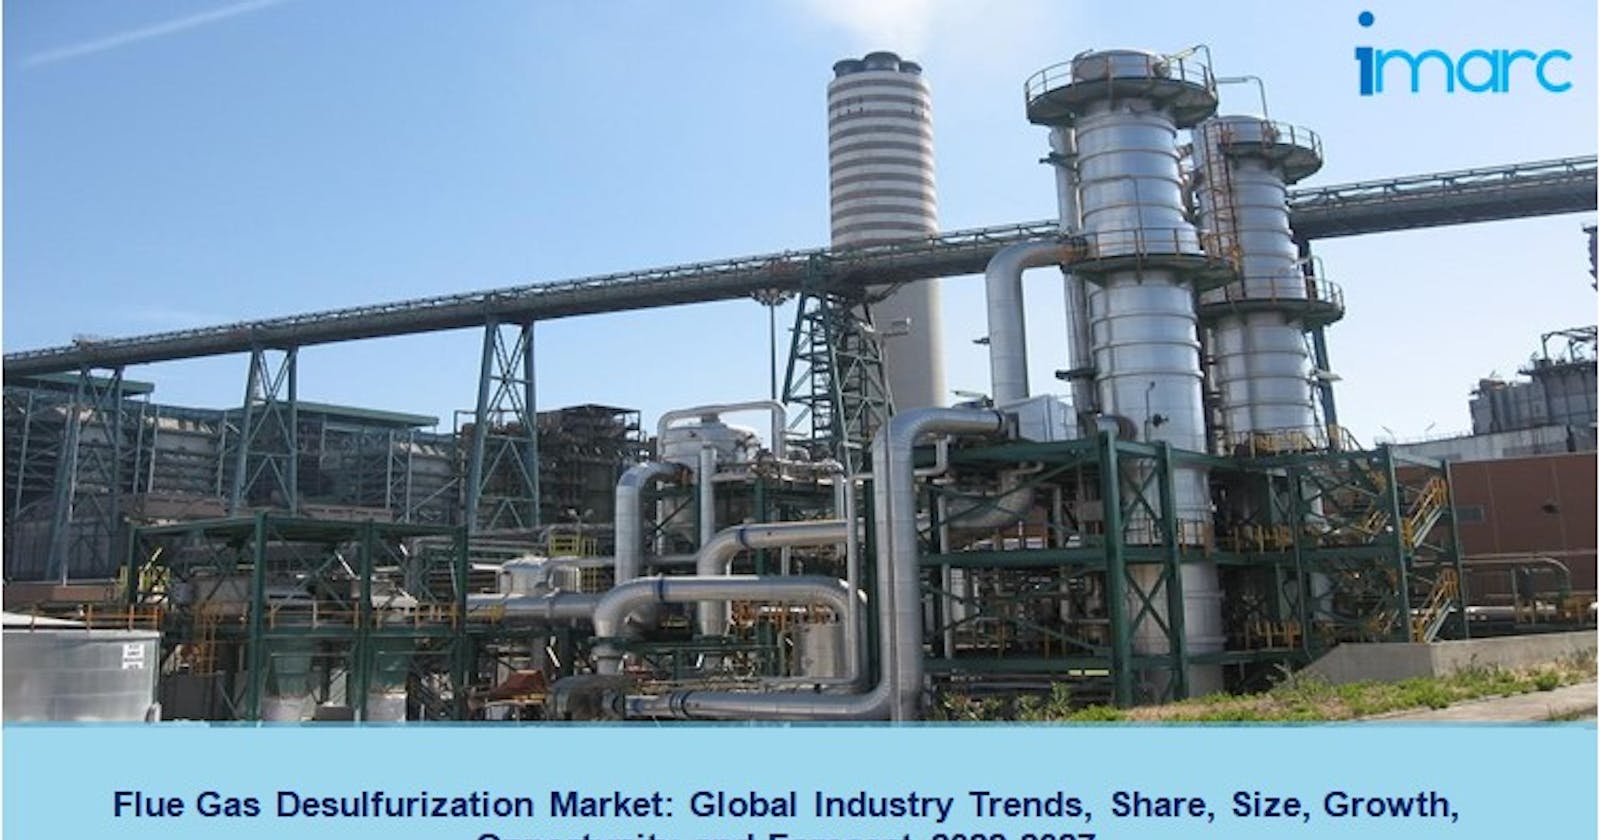 Flue Gas Desulfurization Market Size, Share, Growth and Analysis 2022-2027